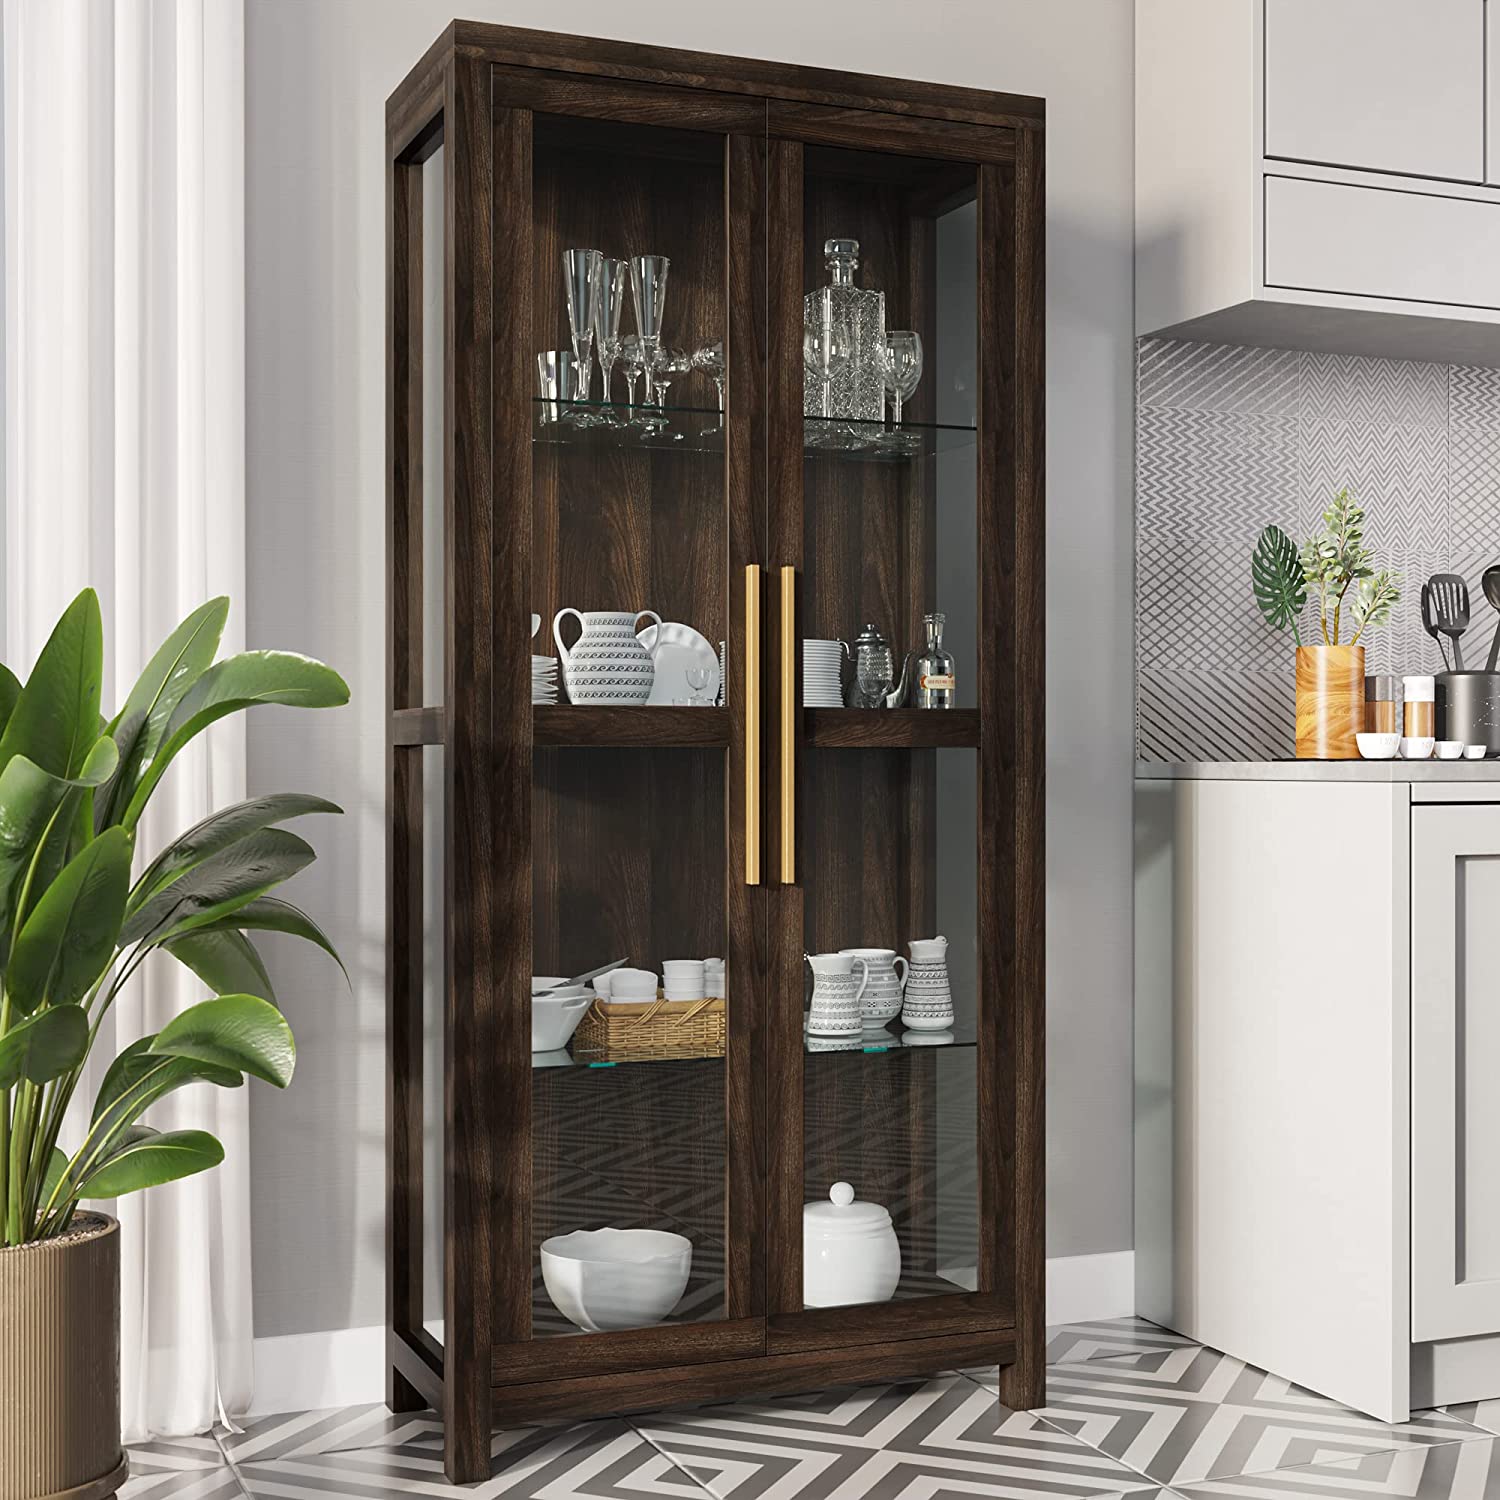 The 15 BEST Glass Curio Cabinets for 2023